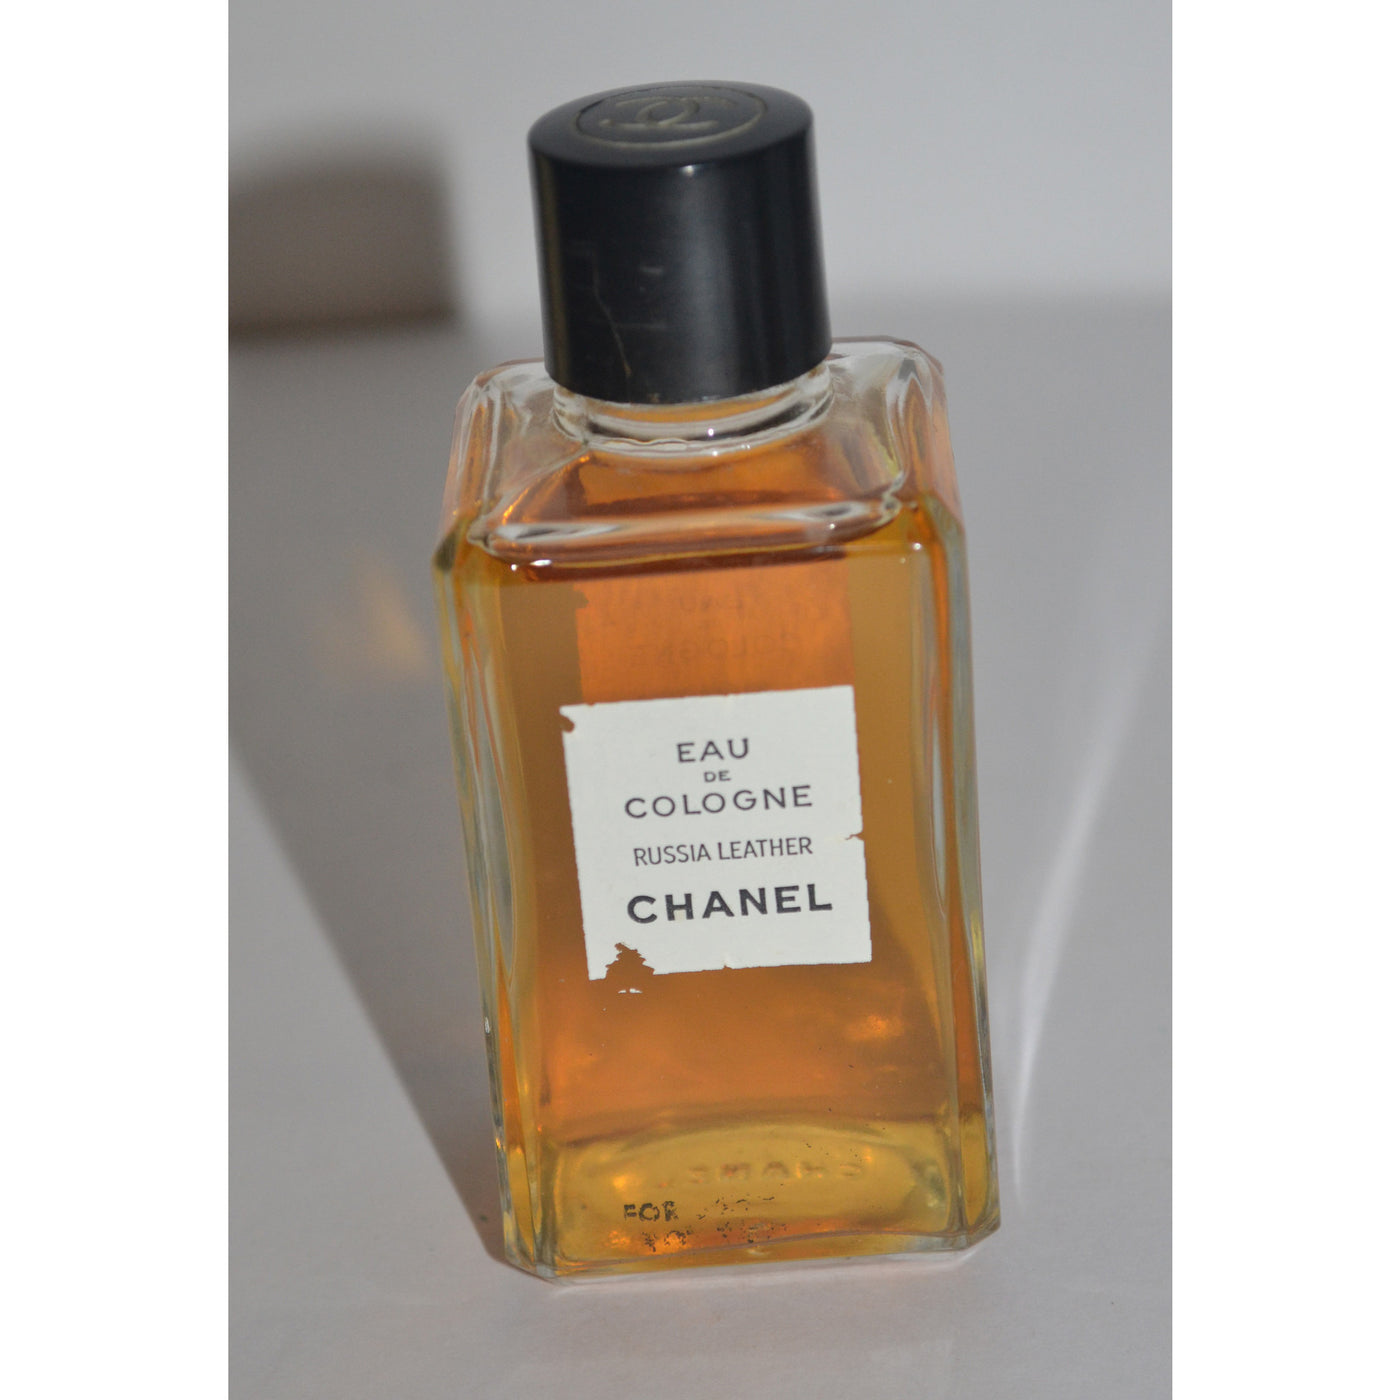 Vintage Chanel Russia Leather Cologne